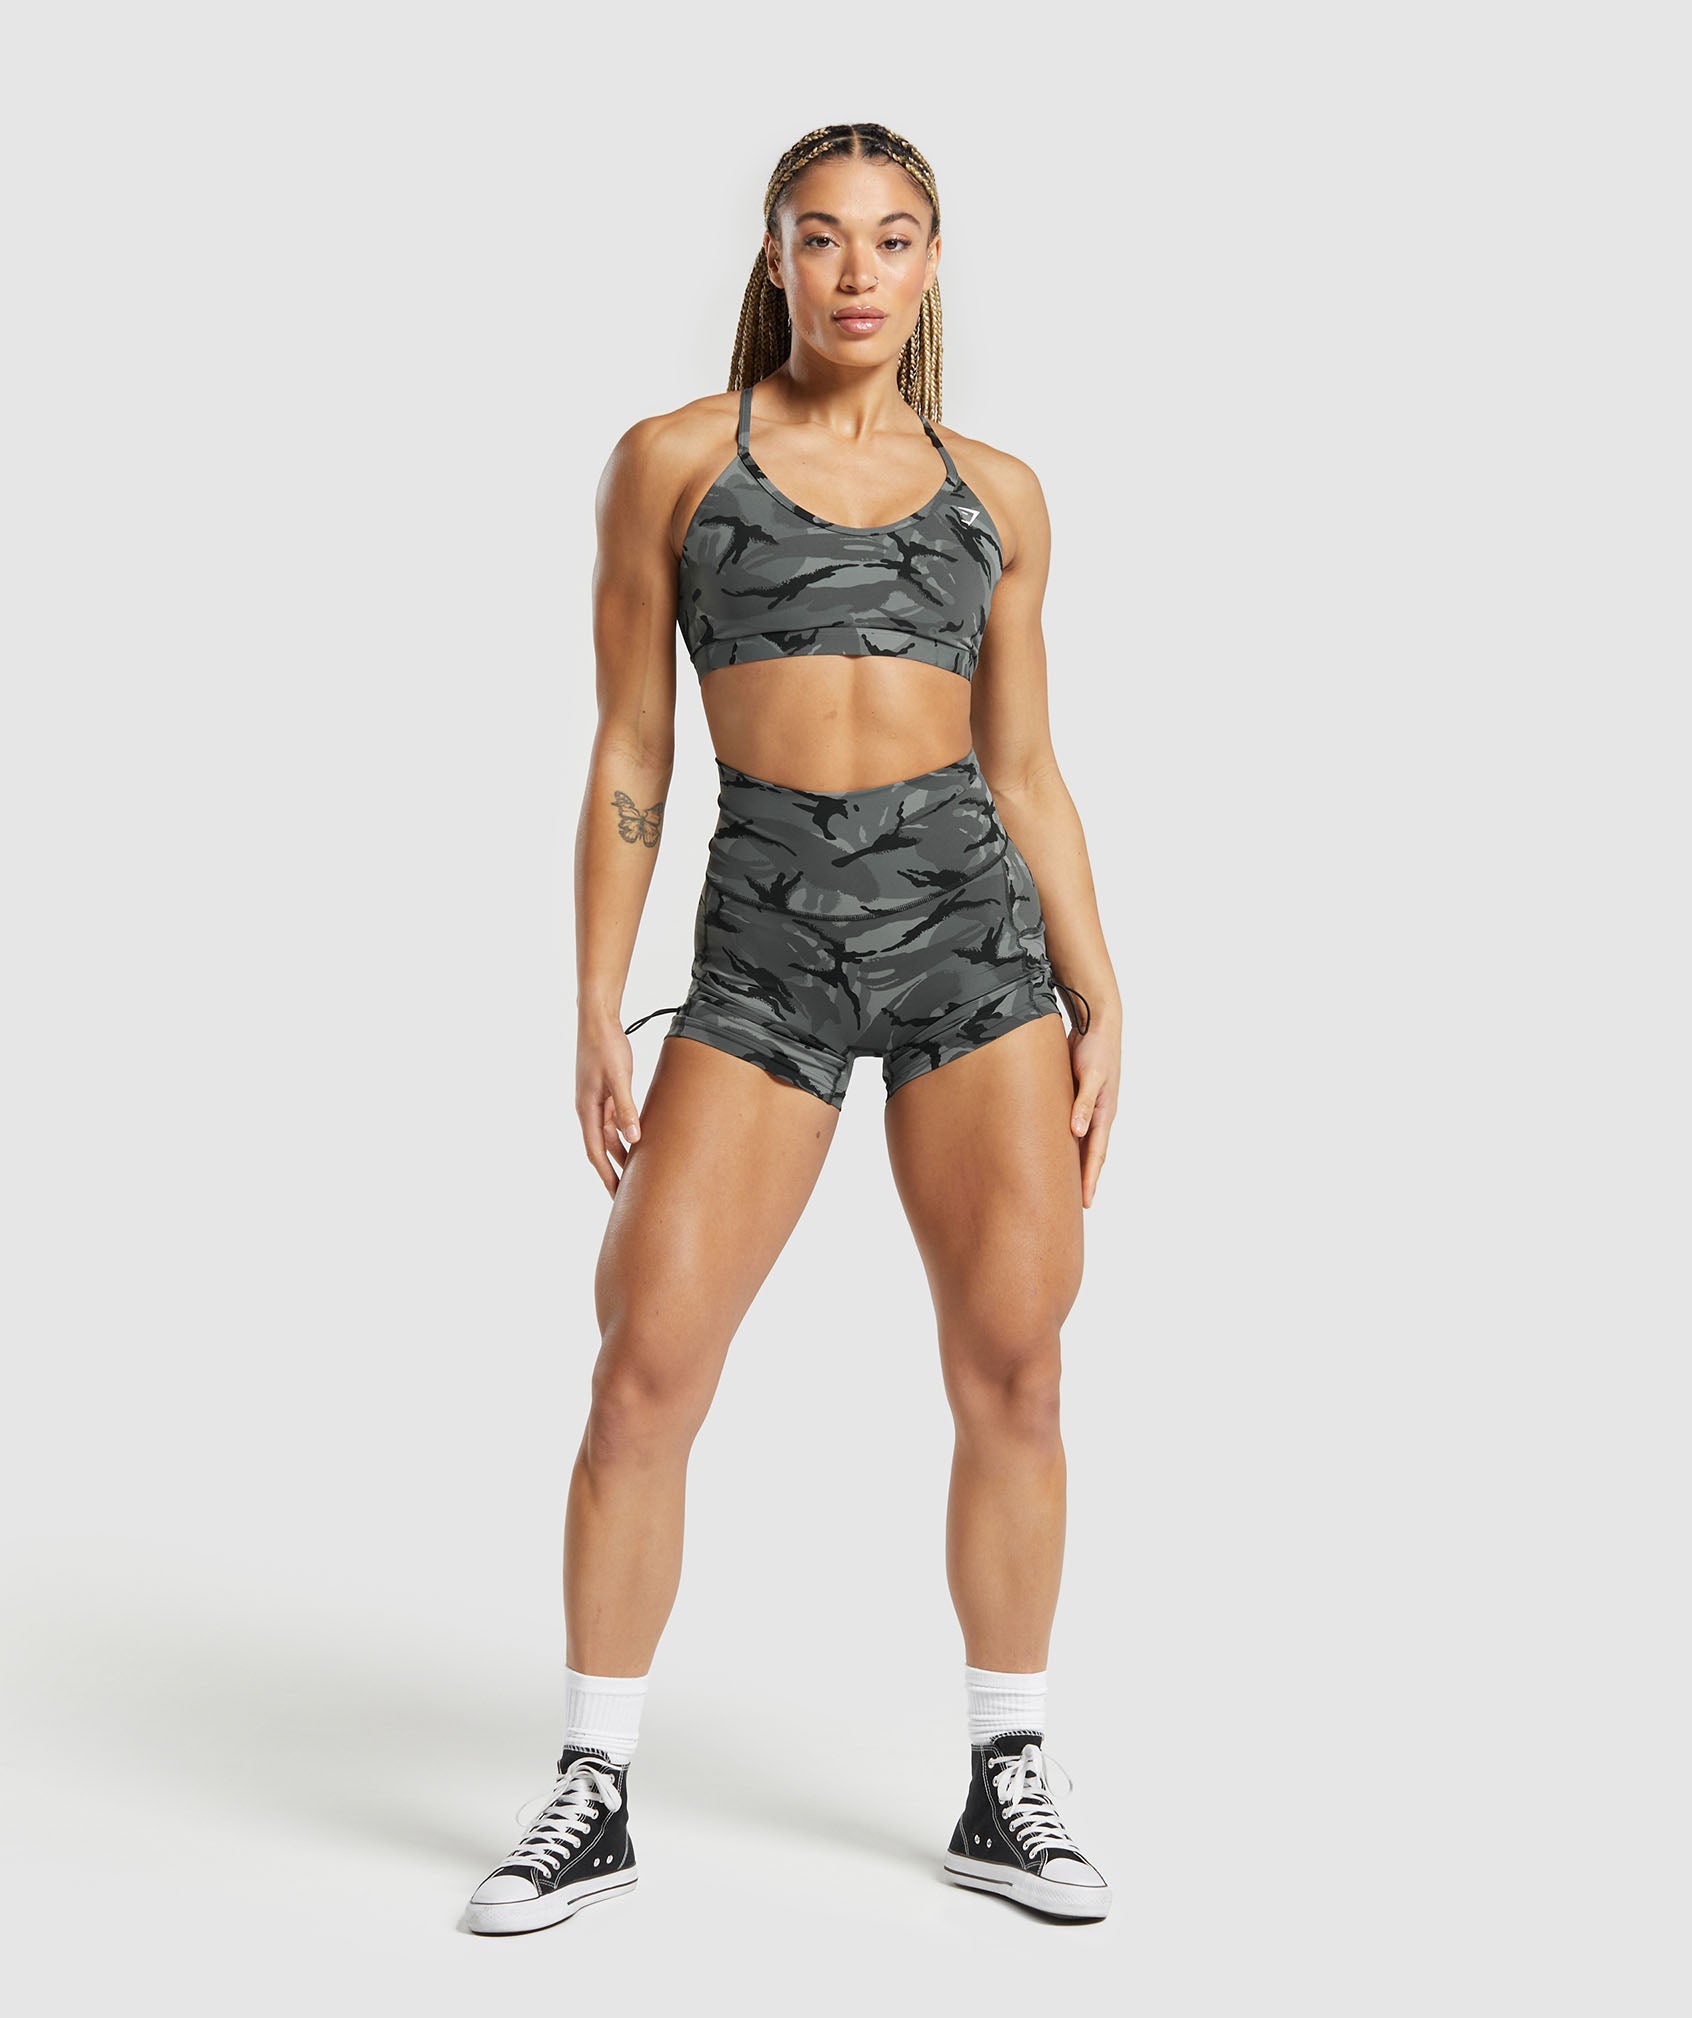 Legacy Printed Sports Bra in Pitch Grey - view 4